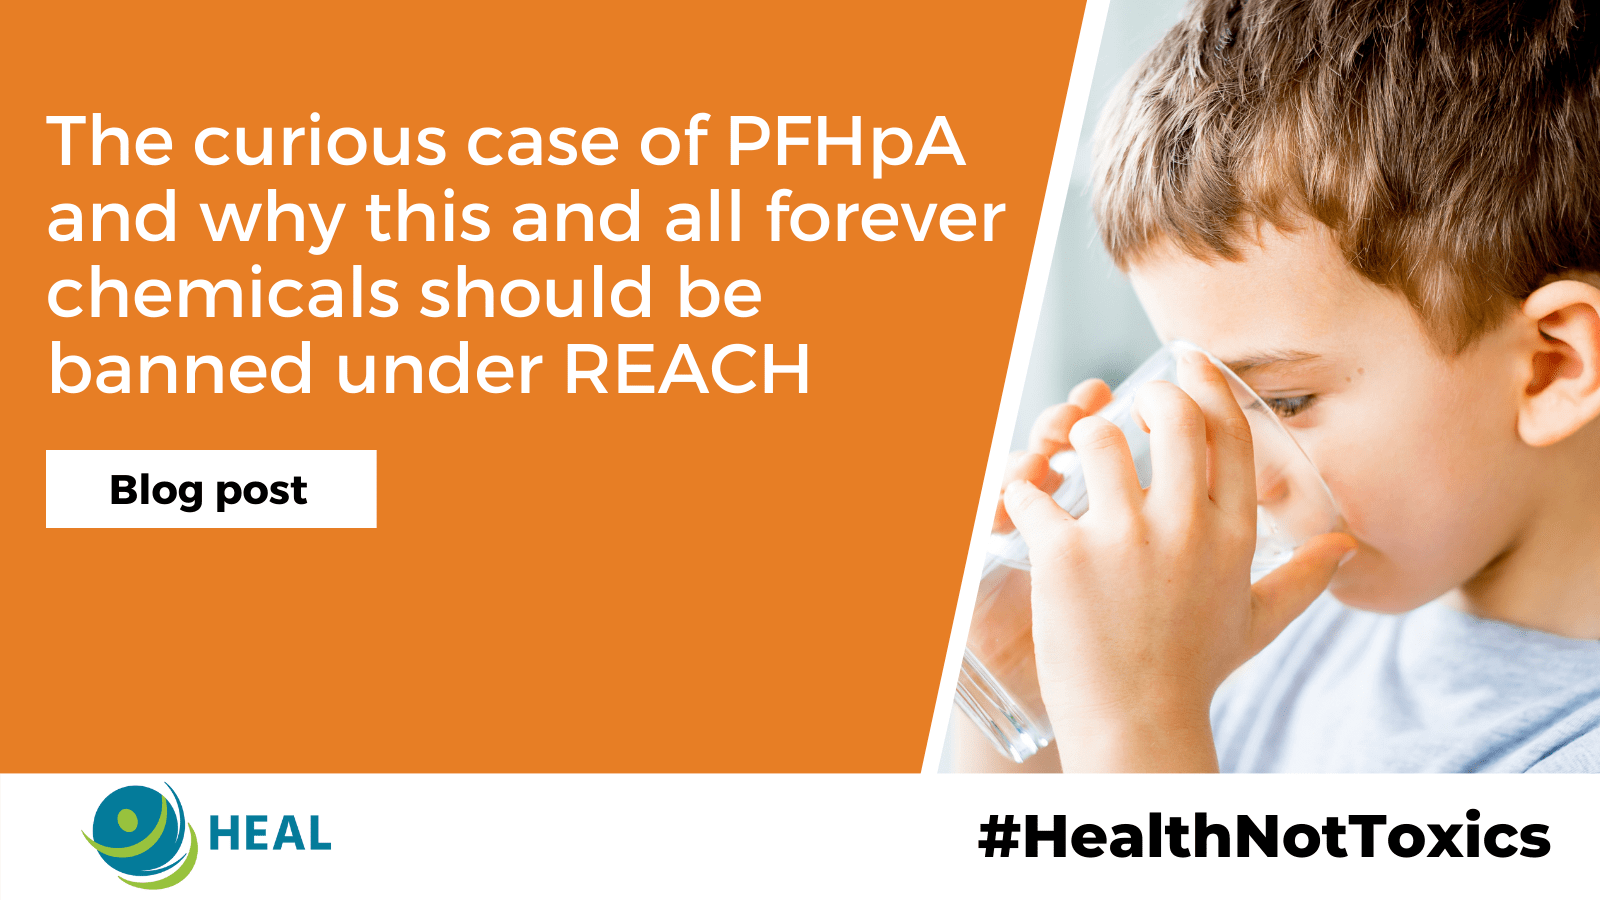 The curious case of PFHpA and why this and all forever chemicals should be banned under REACH